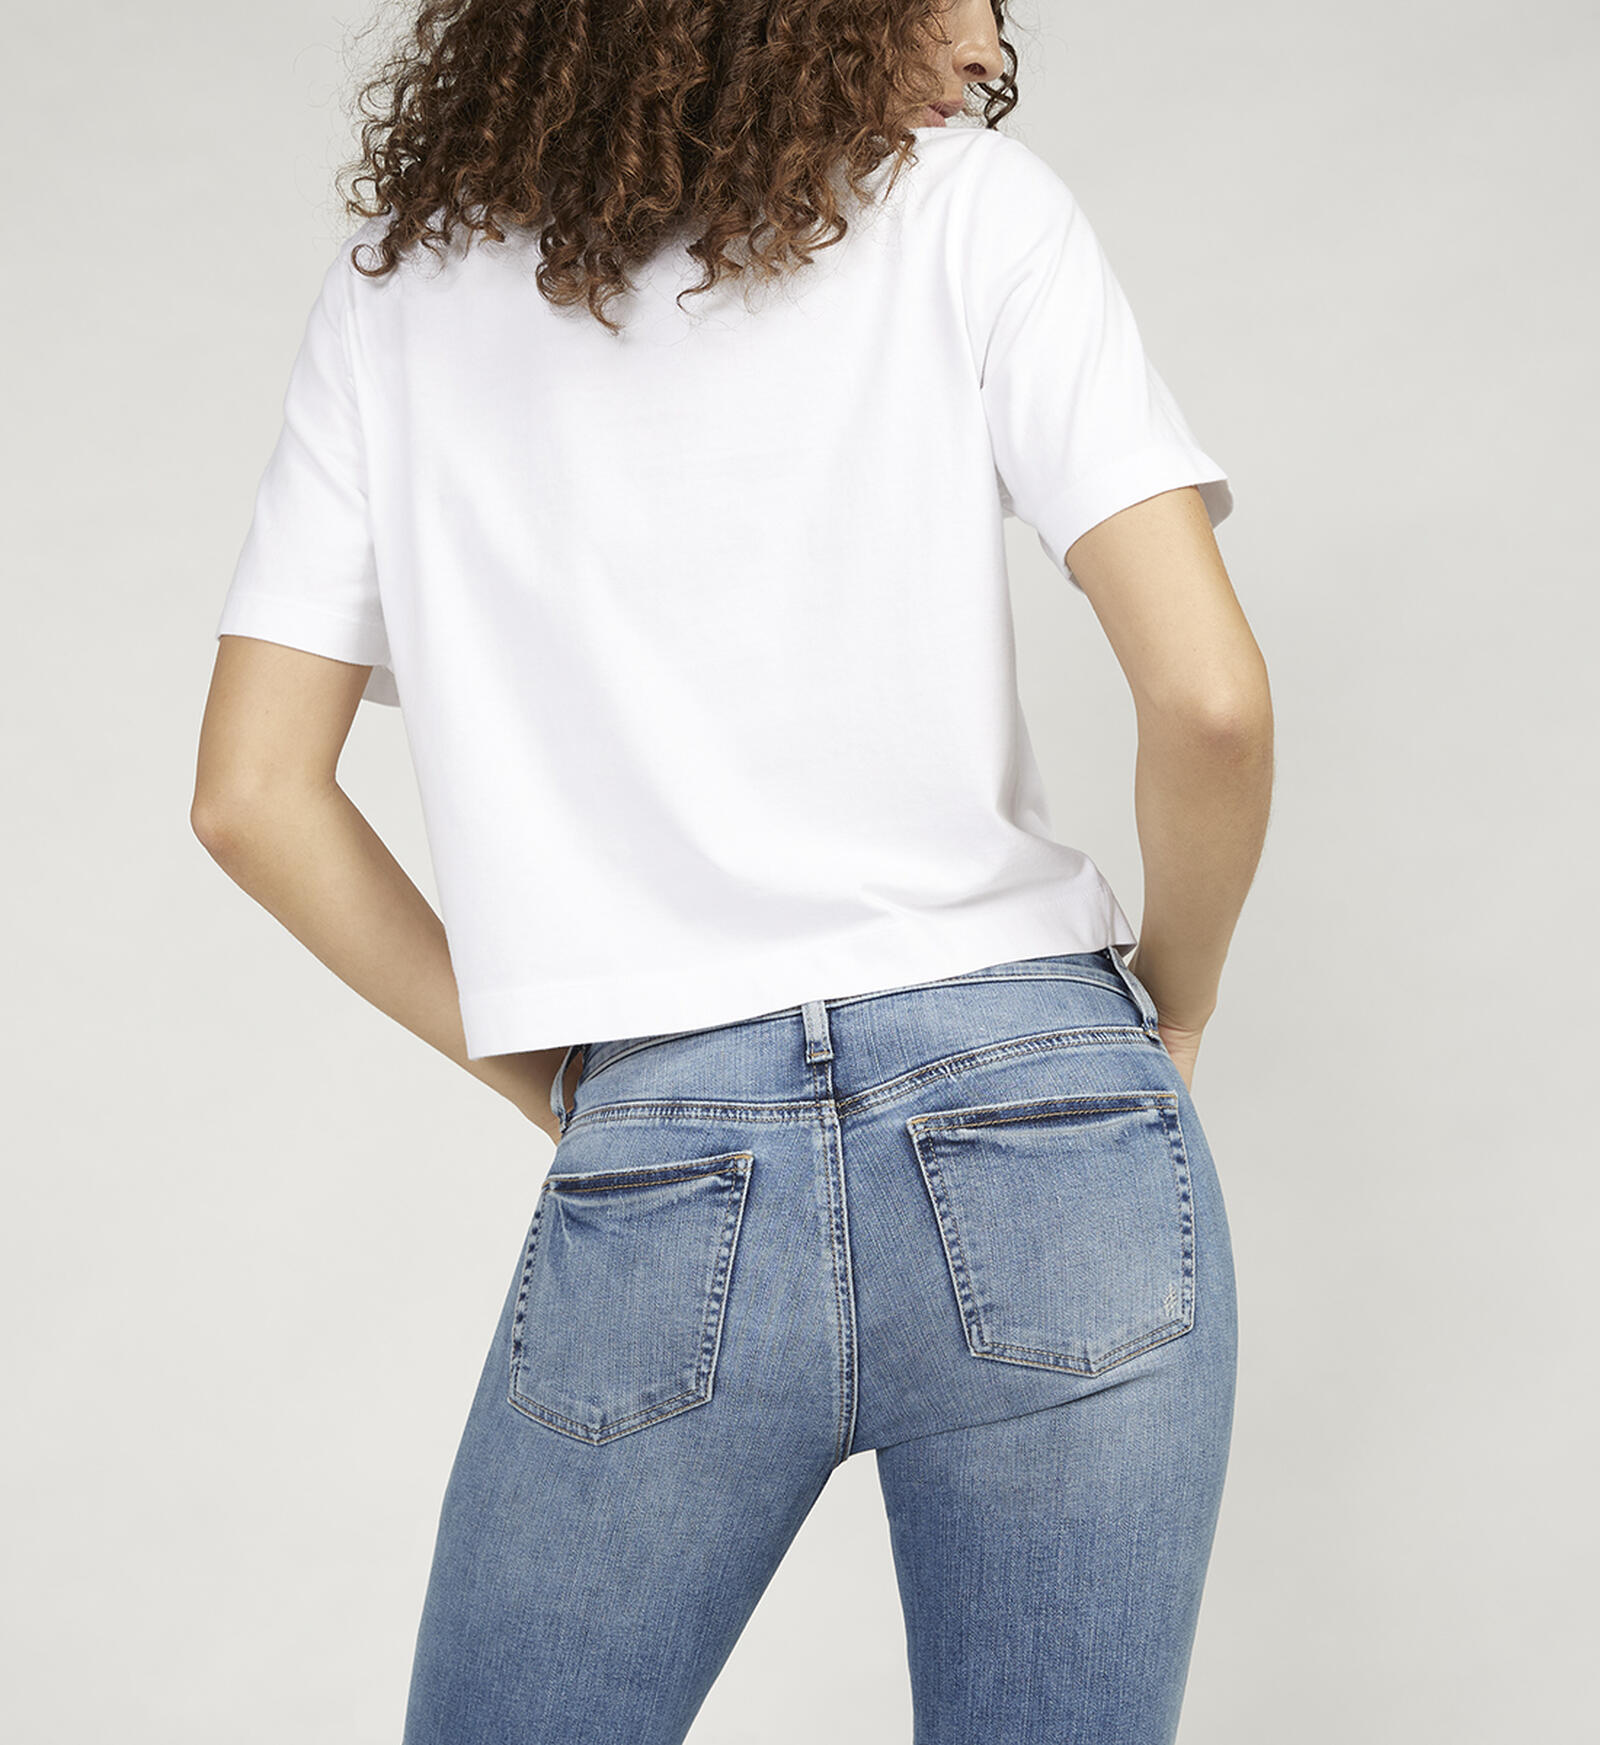 Higher High-Waisted Cropped Flare Jeans for Women